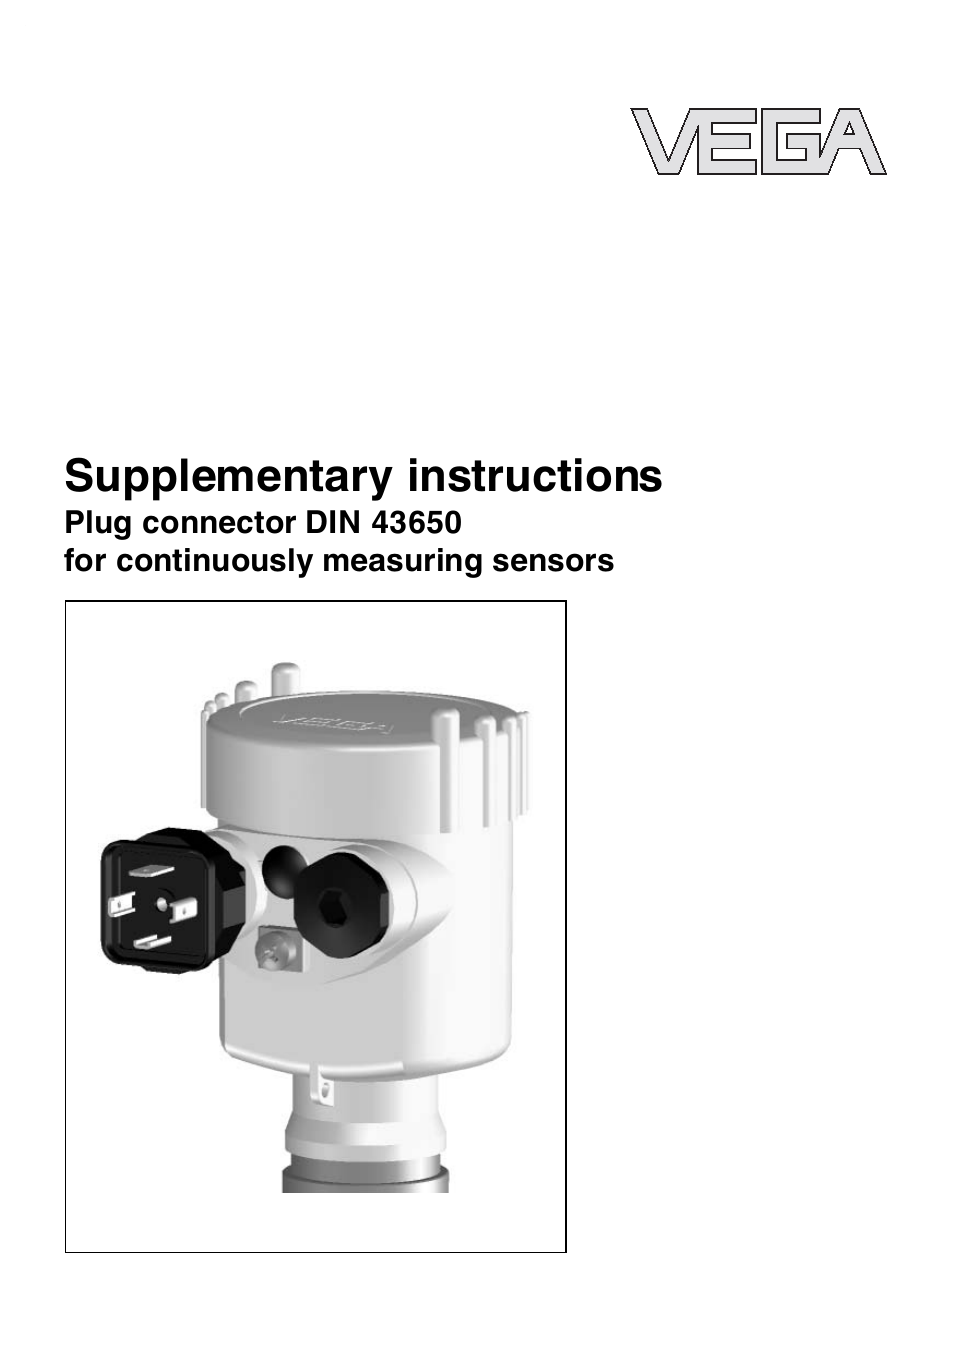 Plug connector DIN 43650 for continuously measuring sensors